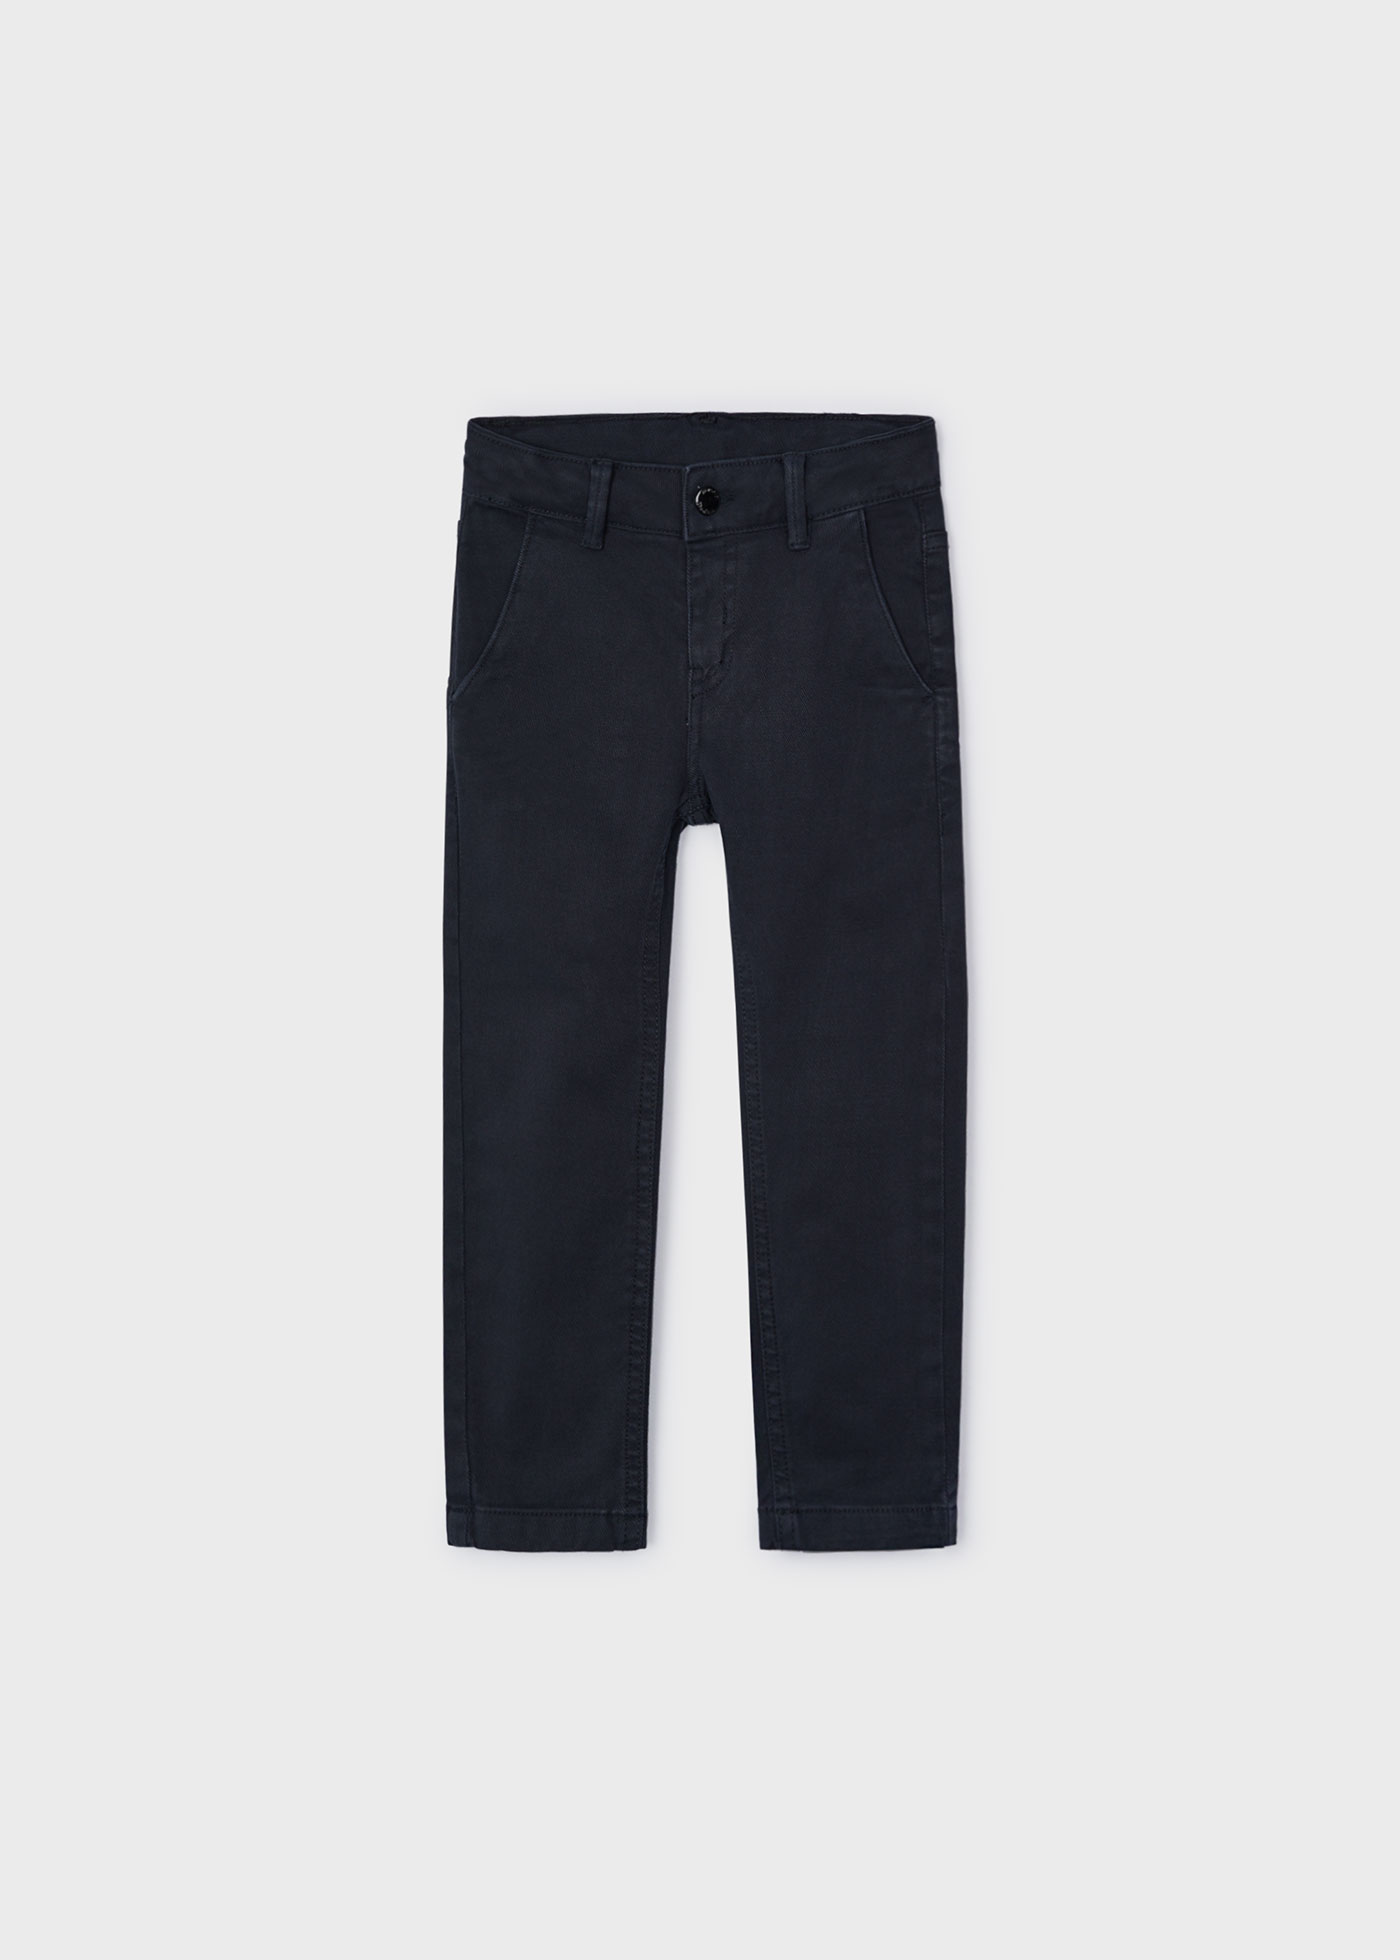 Baggy fit pants for boys